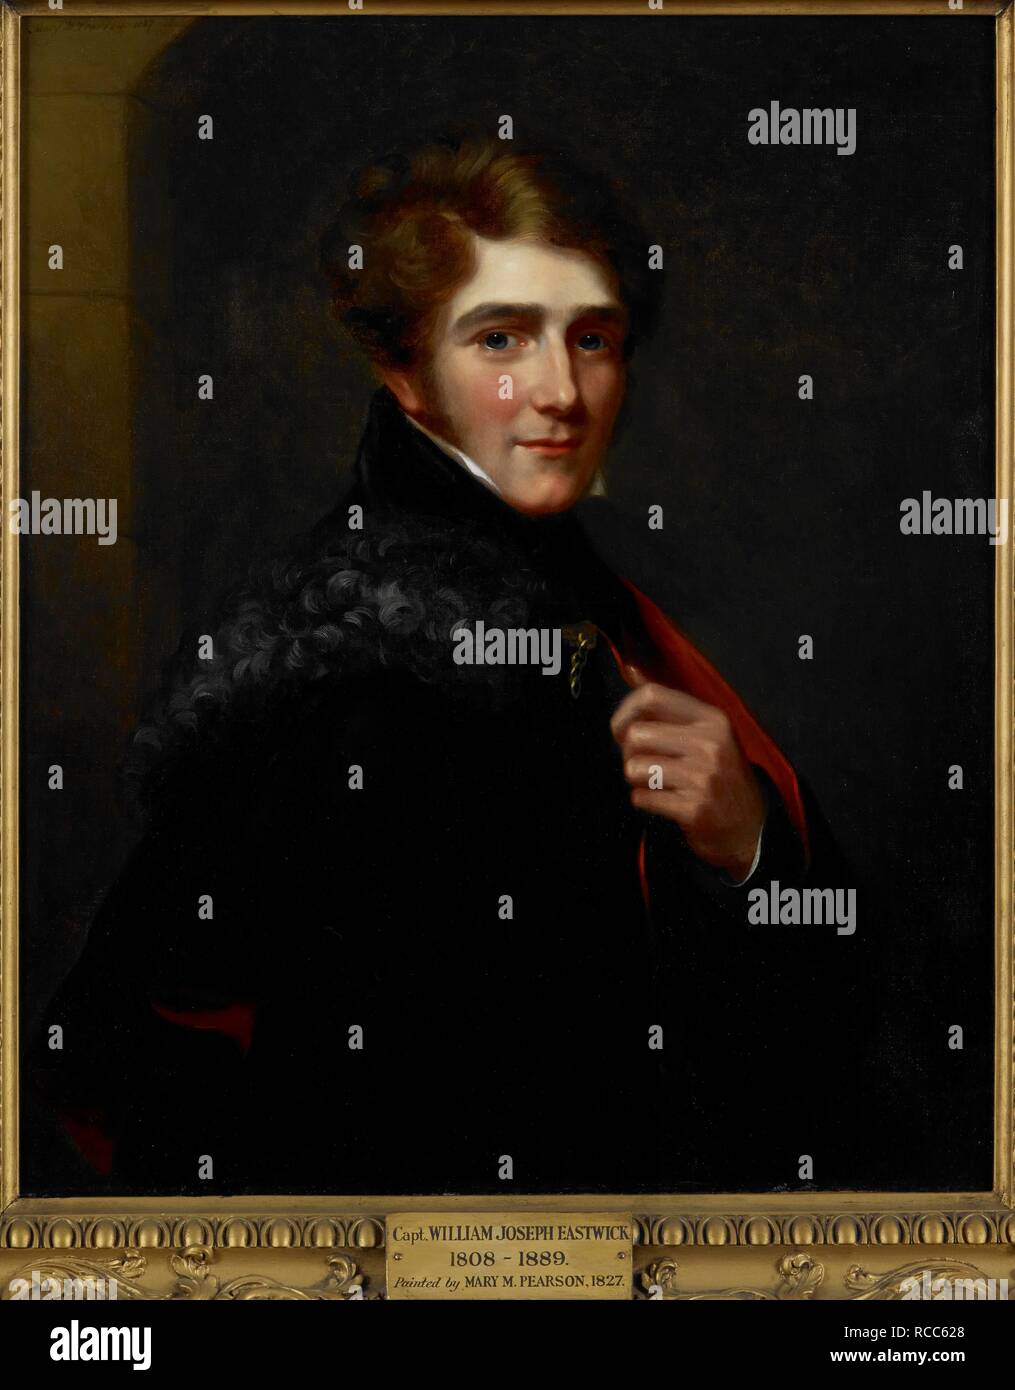 Captain William Joseph Eastwick (1808-89)., Bombay Army 1827-41, and Director of the East India Company 1849-58. A half-length figure, with body turned towards the right. The face is seen almost in full. Eastwick wears a red-lined black cape with a fur collar and gold chain. Dark background with archway. arrived in India in 1827 and served with the Bombay army in the Kolhapur and South Maratha country. He became Assistant to Sir H. Pottinger in Sind and negotiated the 1839 Treaty with the Amirs. He served in the 1st Afghan War and obtained supplies for Nott at Kandahar. He retired in 1841 and  Stock Photo